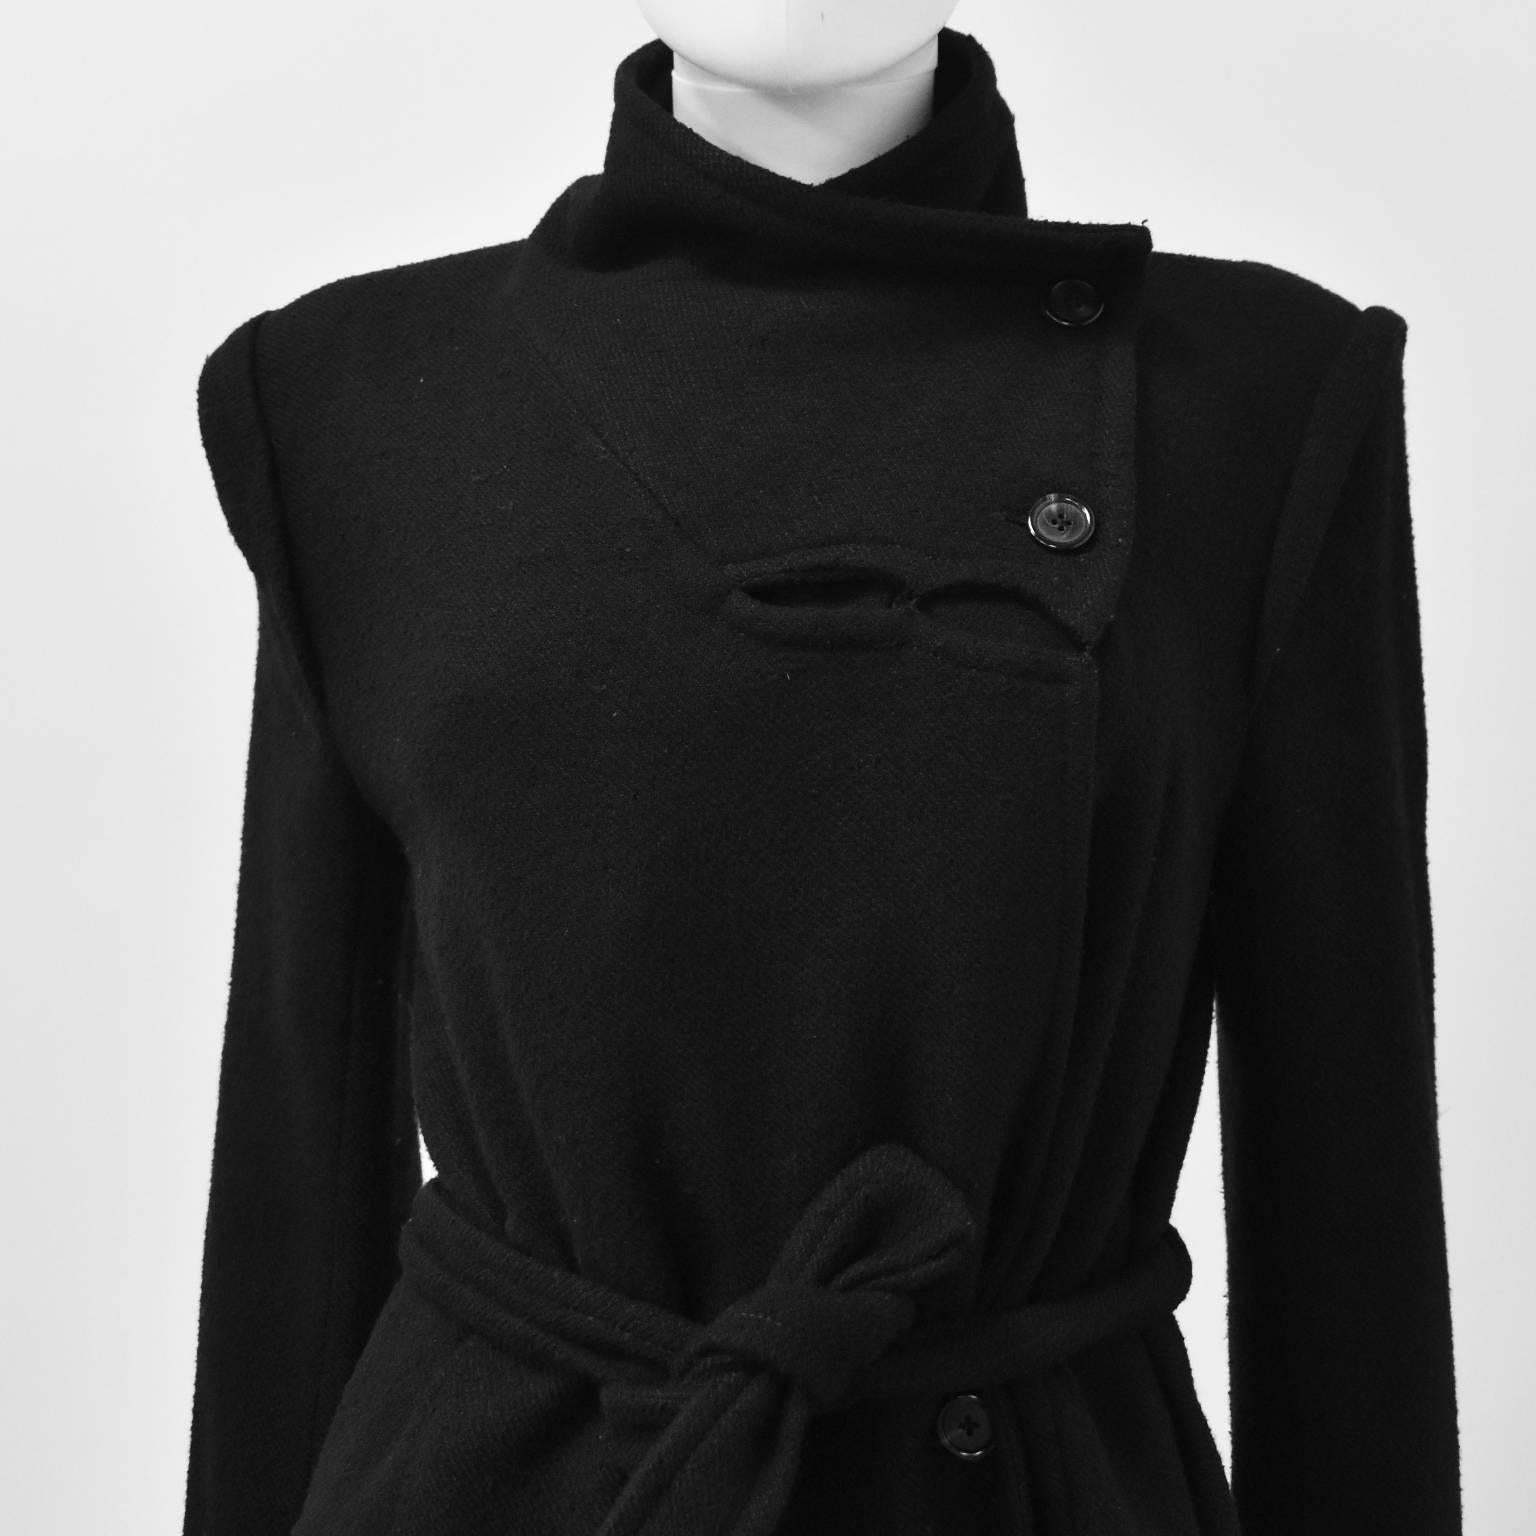 A beautiful Winter coat by Belgian designer Ann Demeulemeester. The coat has a military-esque design with an asymmetric collar and button fastening that can be worn open to create a one-sided collar or a funnel neck. The coat has a diagonal